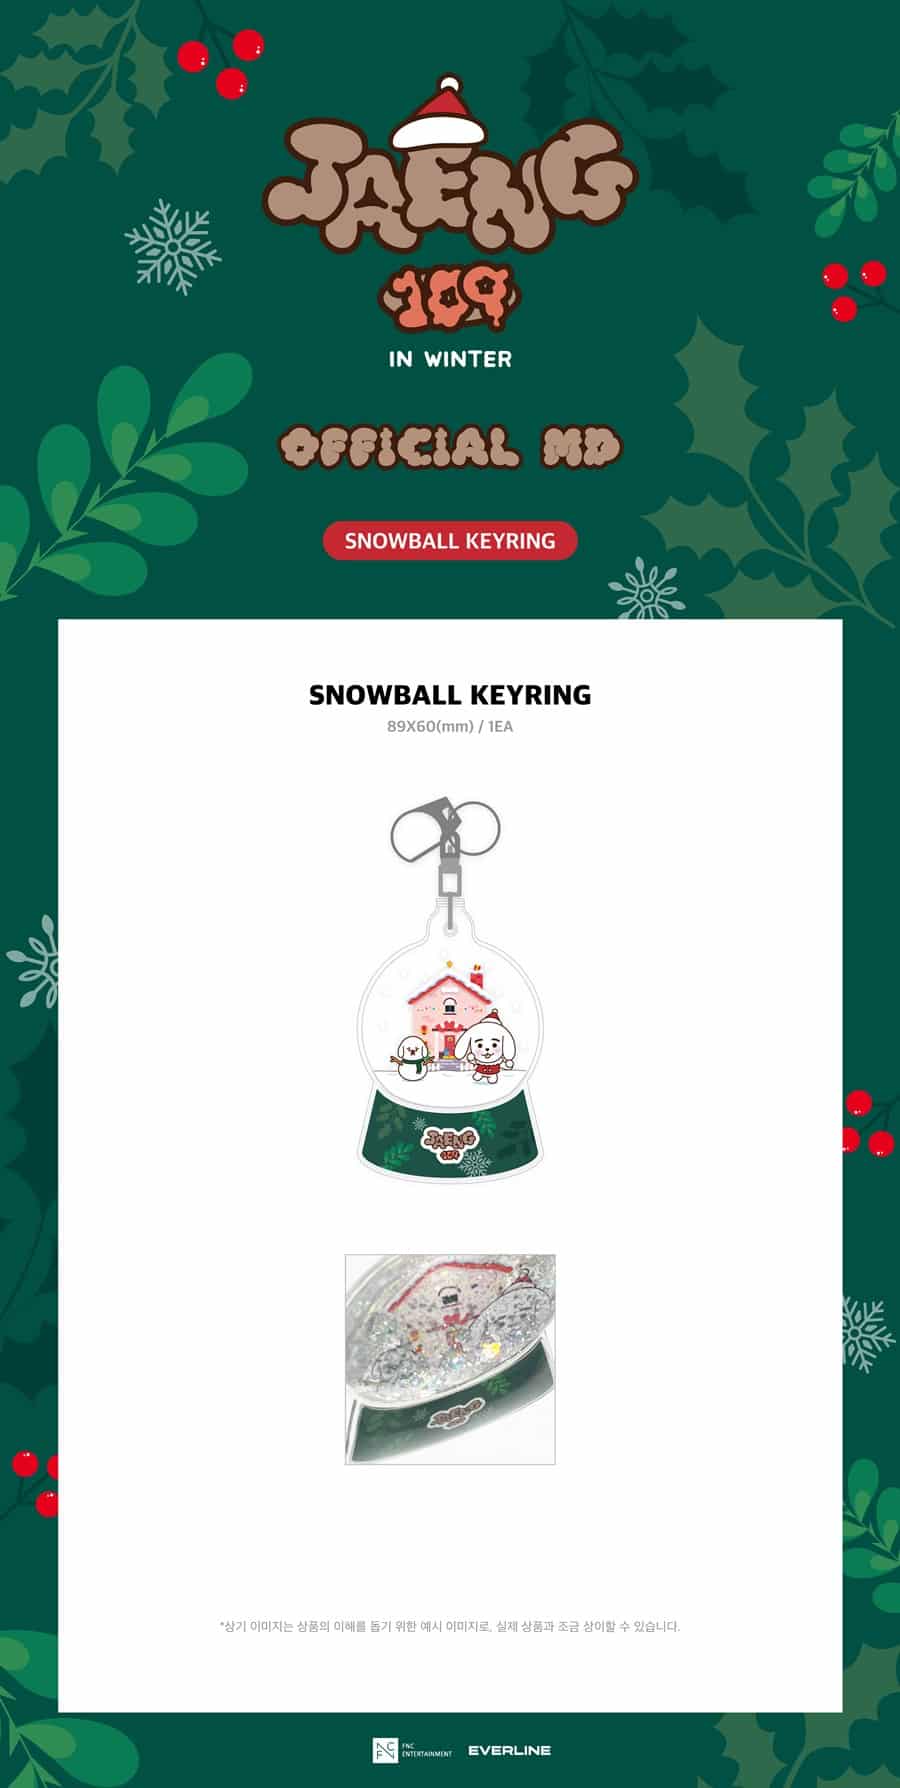 jaeng109-in-winter-pop-up-official-md-snowball-keyring-wholesales